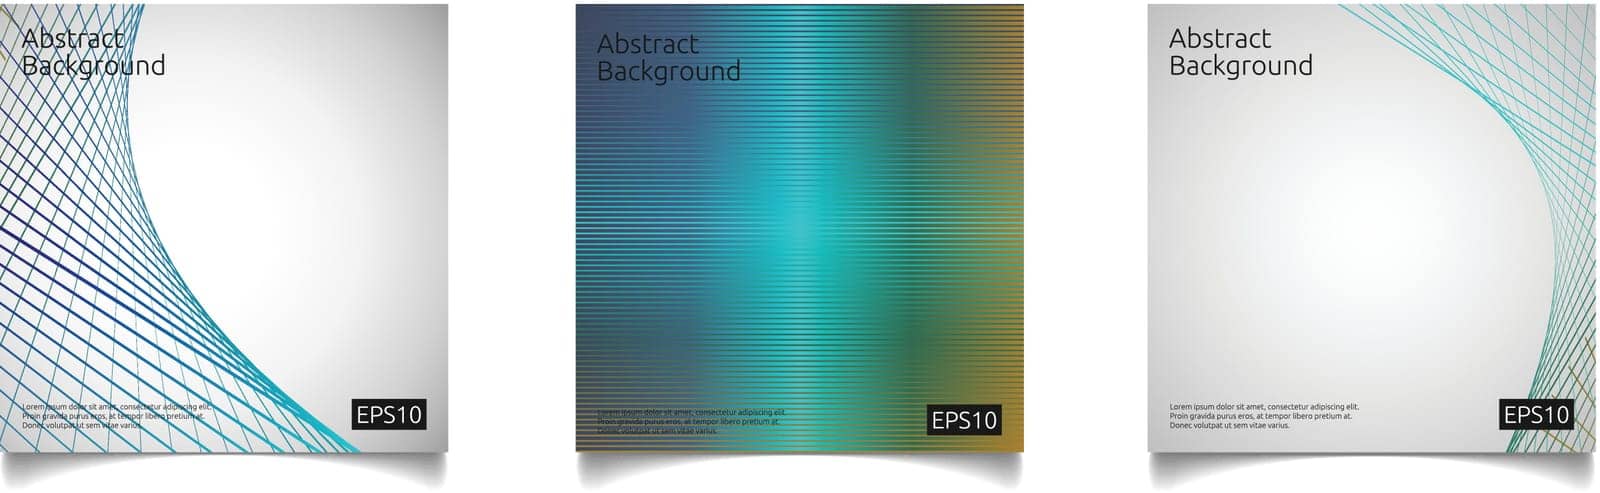 space,cover,presentation,white,trendy,stripe,dynamic,flow,element,energy,tech,shape,backdrop,creative,light,science,geometric,style,poster,colorful,template,color,curve,line,concept,pattern,speed,wave,network,minimal,futuristic,modern,design,vector,graphic,mesh,smooth,digital,brochure,wallpaper,business,motion,texture,abstraction,gradient,banner,abstract,technology,structure,geometry,illustration